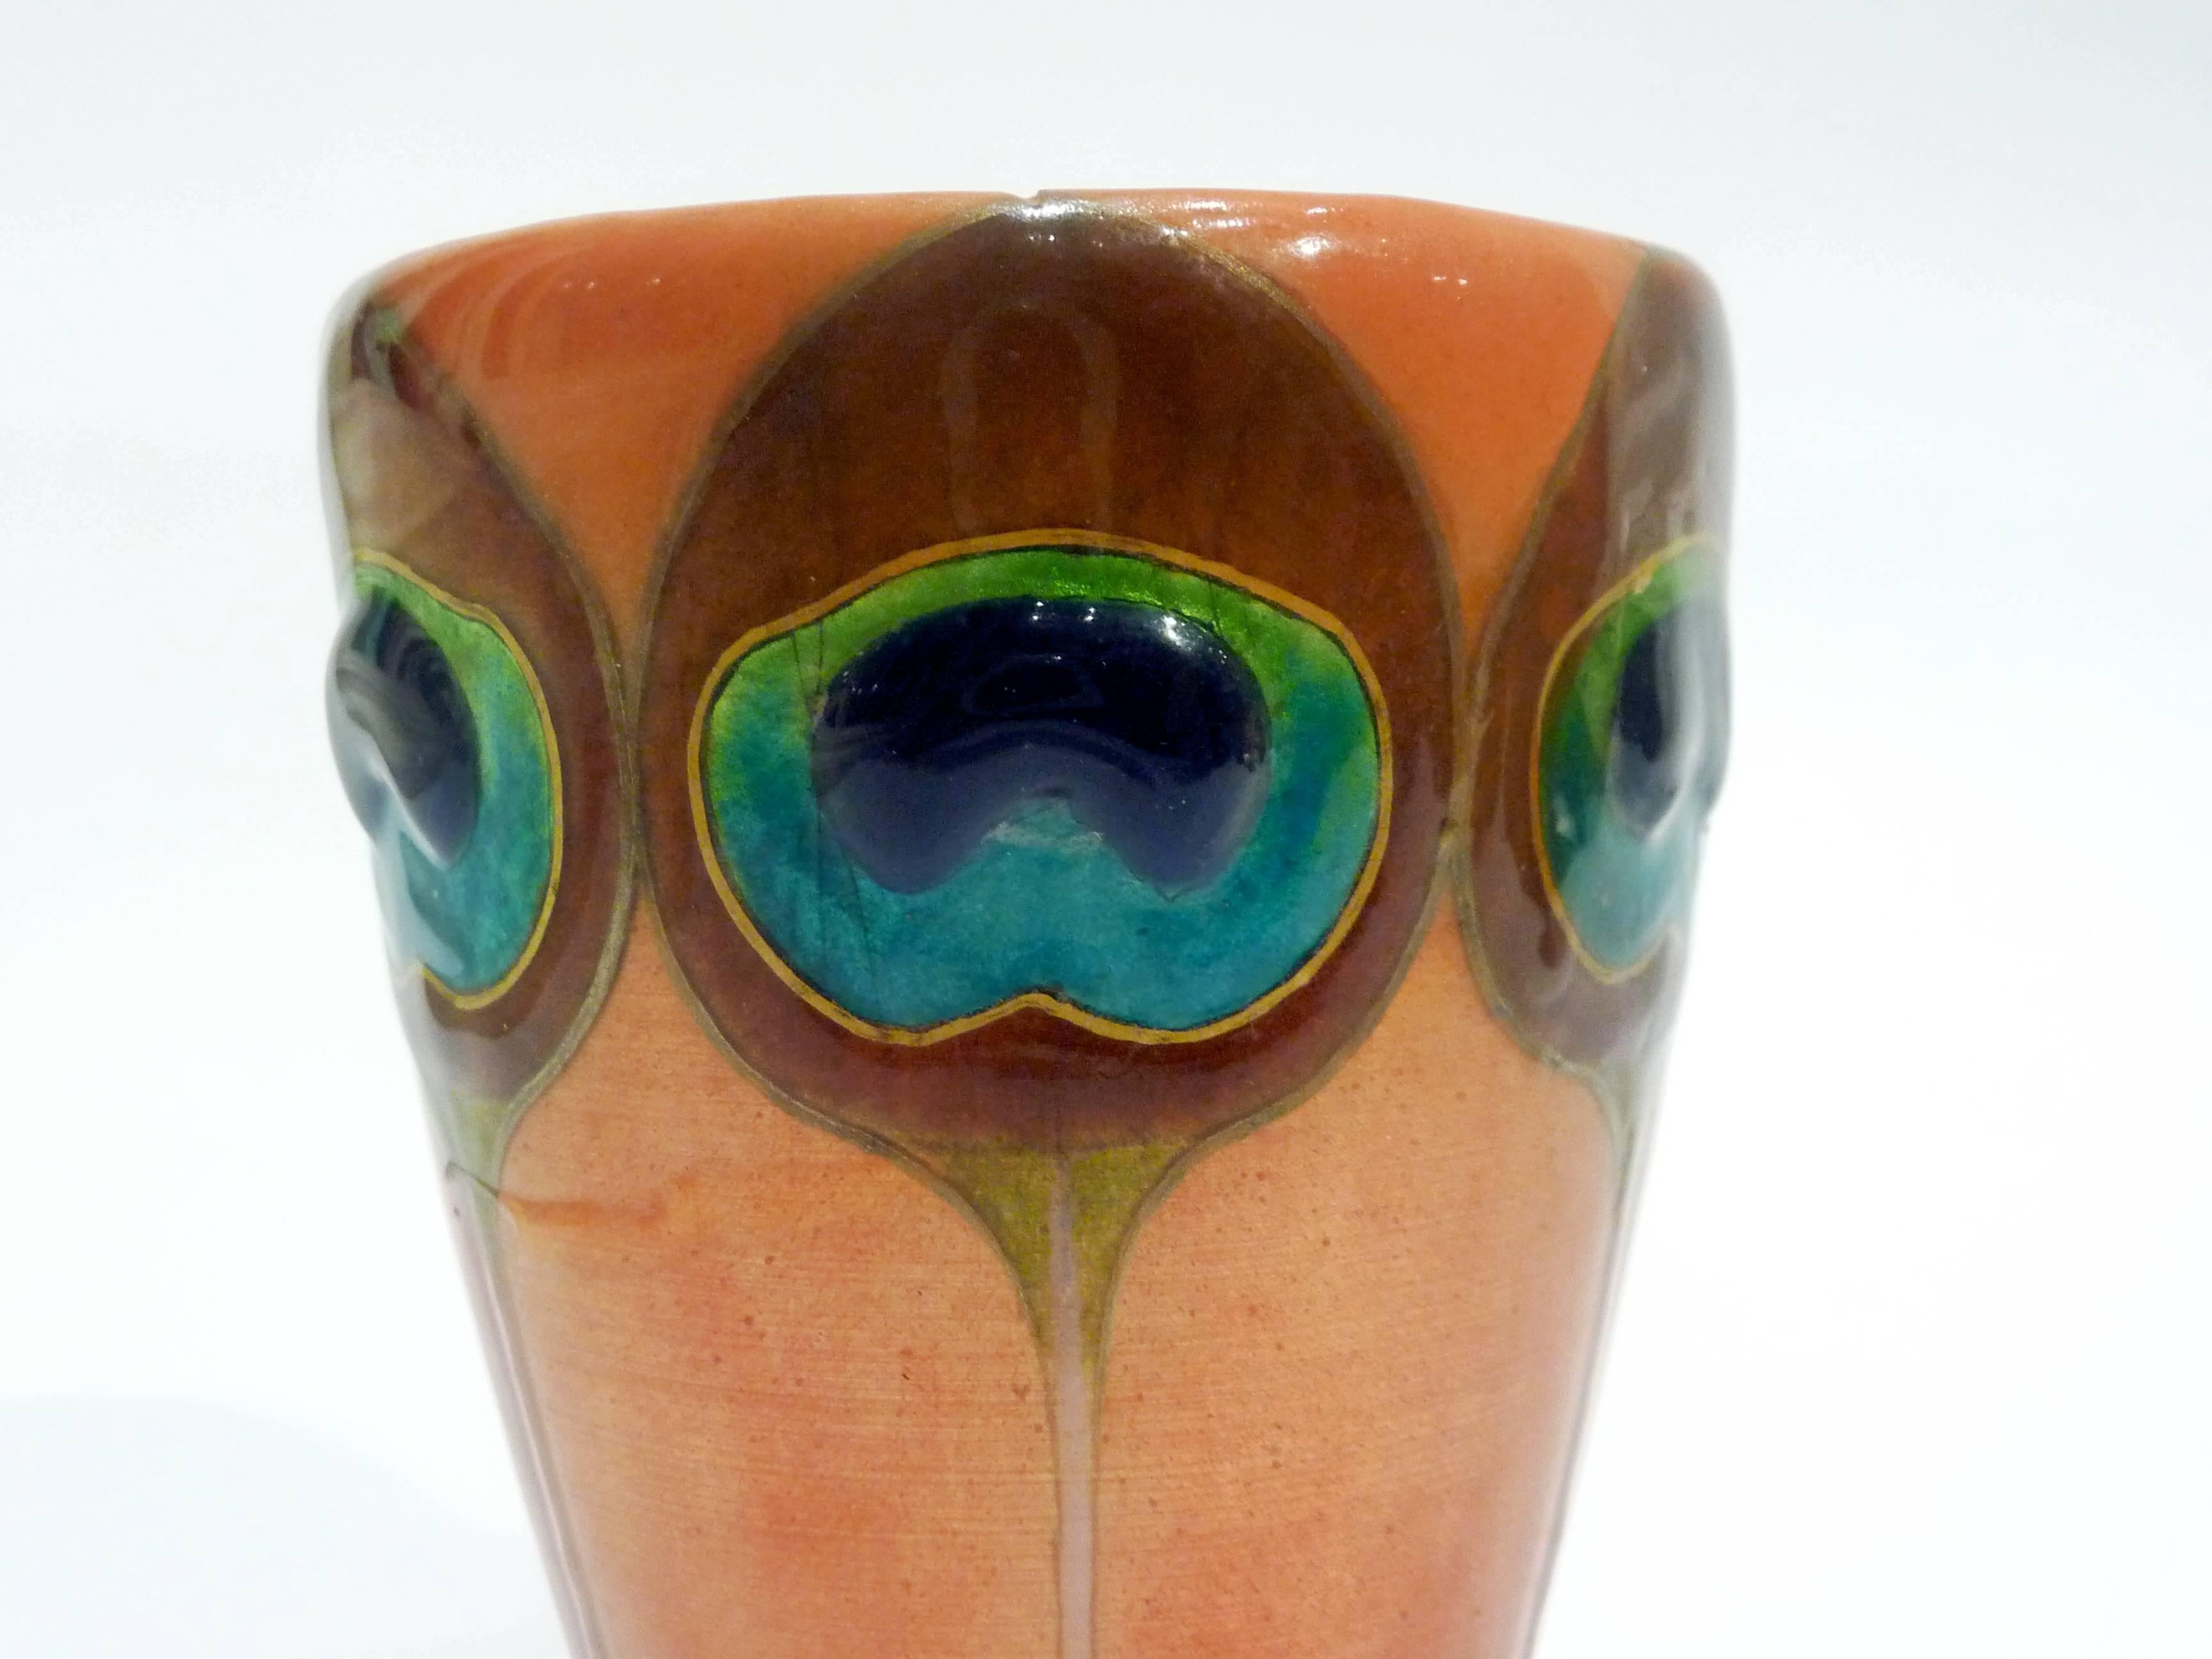 Georges Jean
Polychrome enamel vase on copper decorated with peacock feathers
Signed 